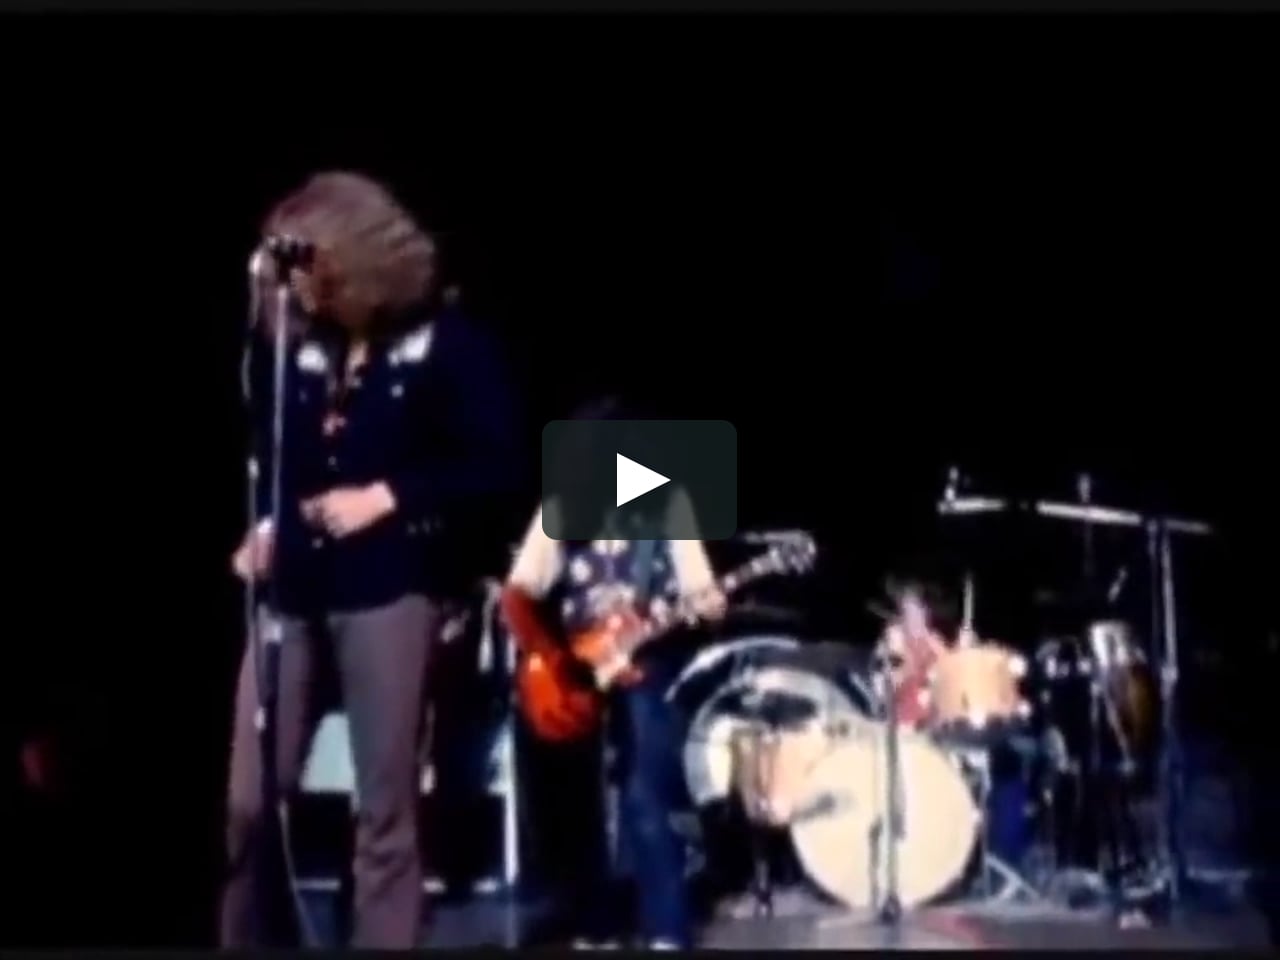 Led Zeppelin Live Performance - January 9th, 1970 (Jimmy Page's Birthday)